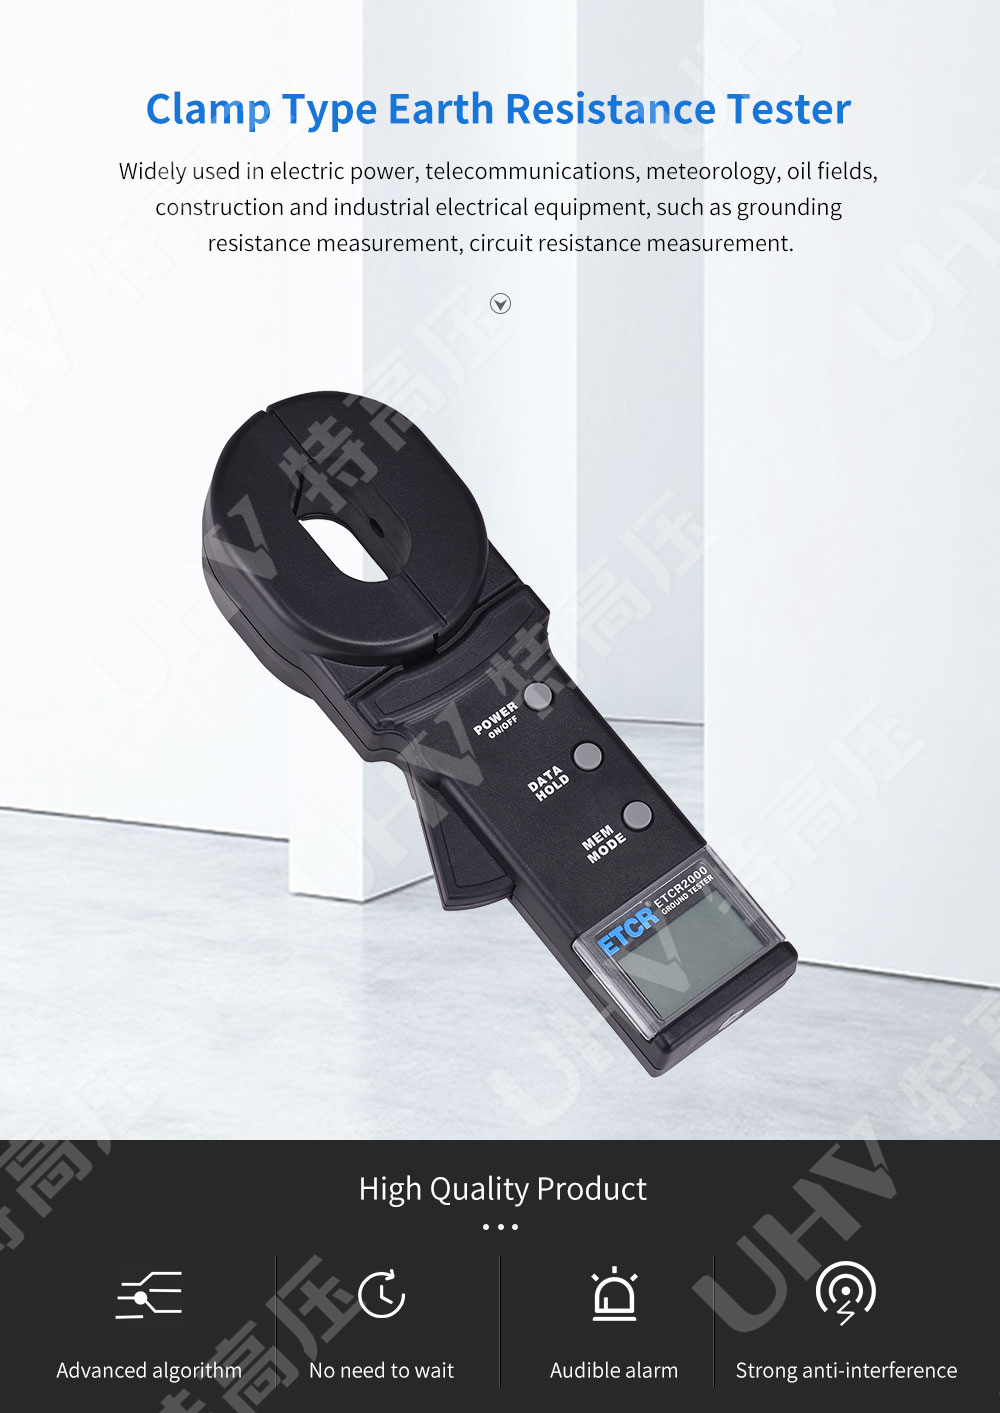 ETCR2000 Clamp Type Earth Resistance Tester